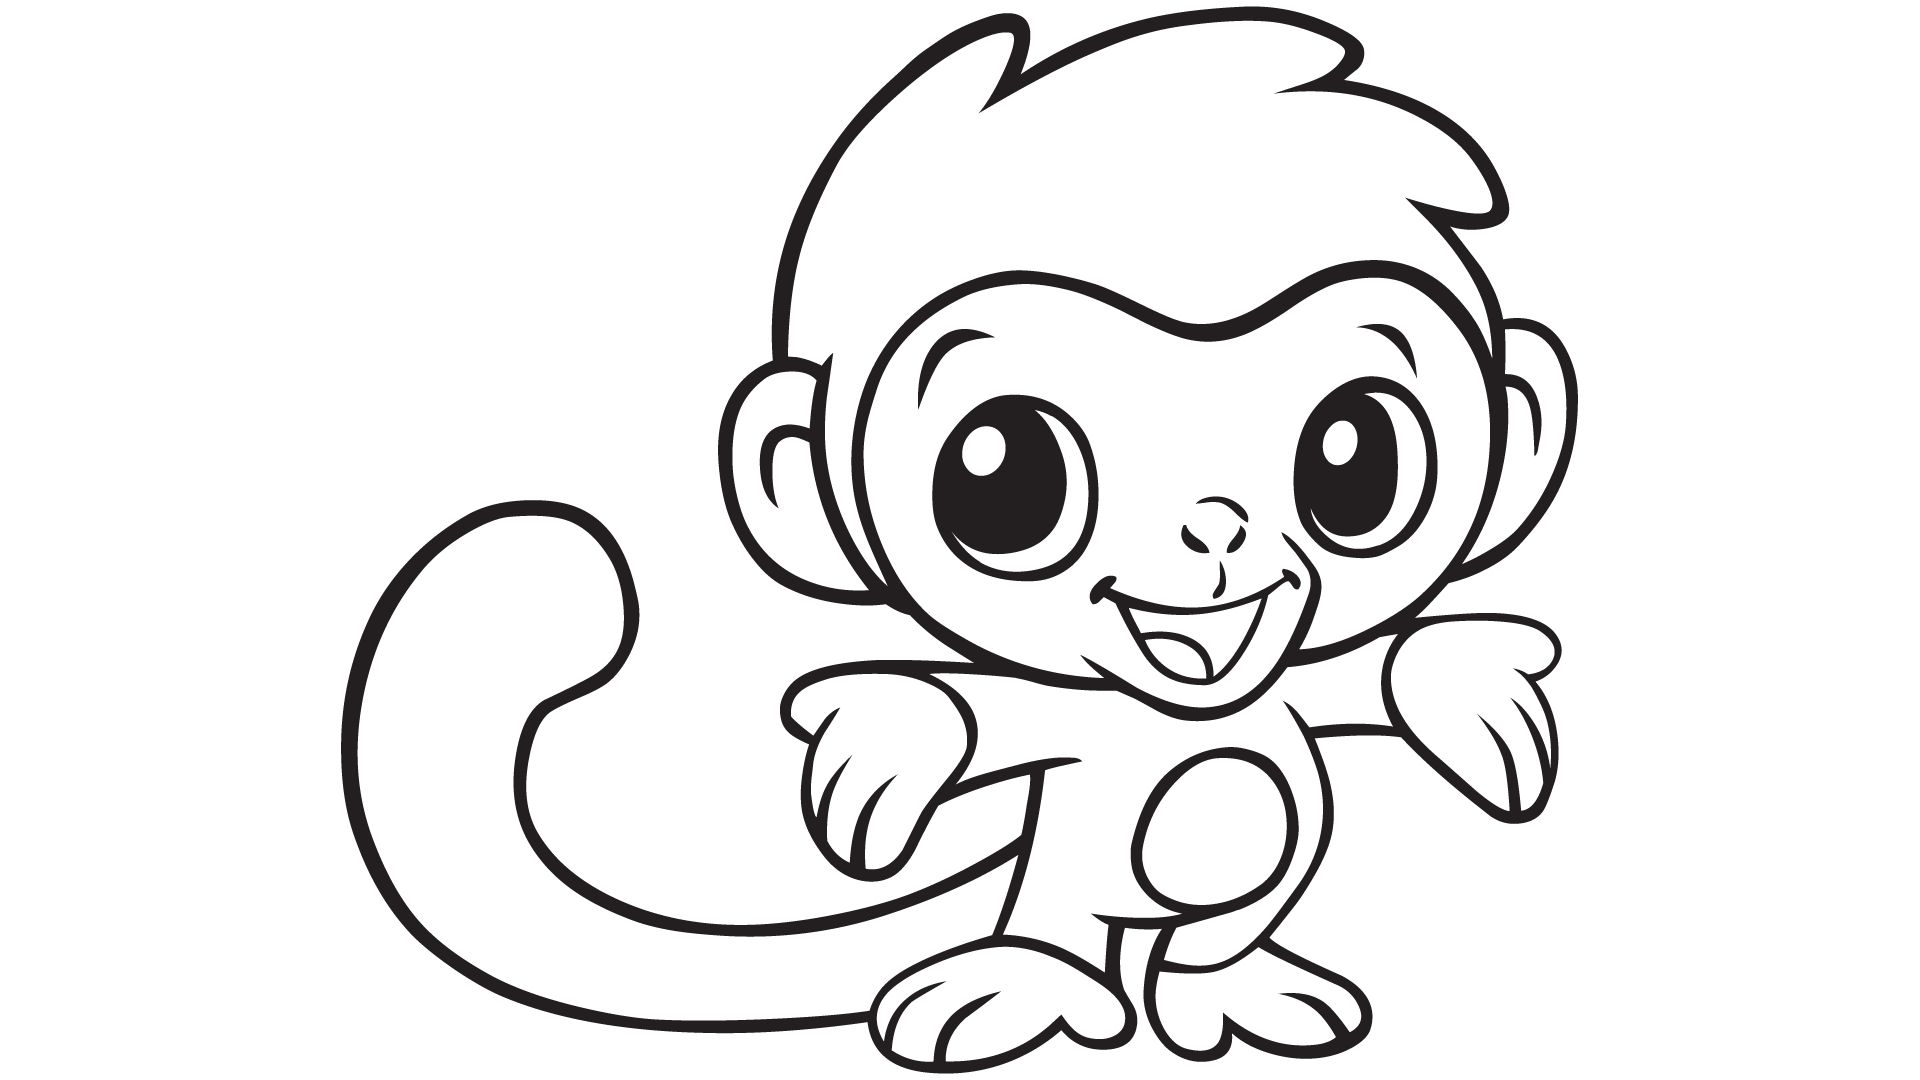 Sock Monkey Coloring Page Ba Monkey Coloring Pages At Getdrawings Free For Personal